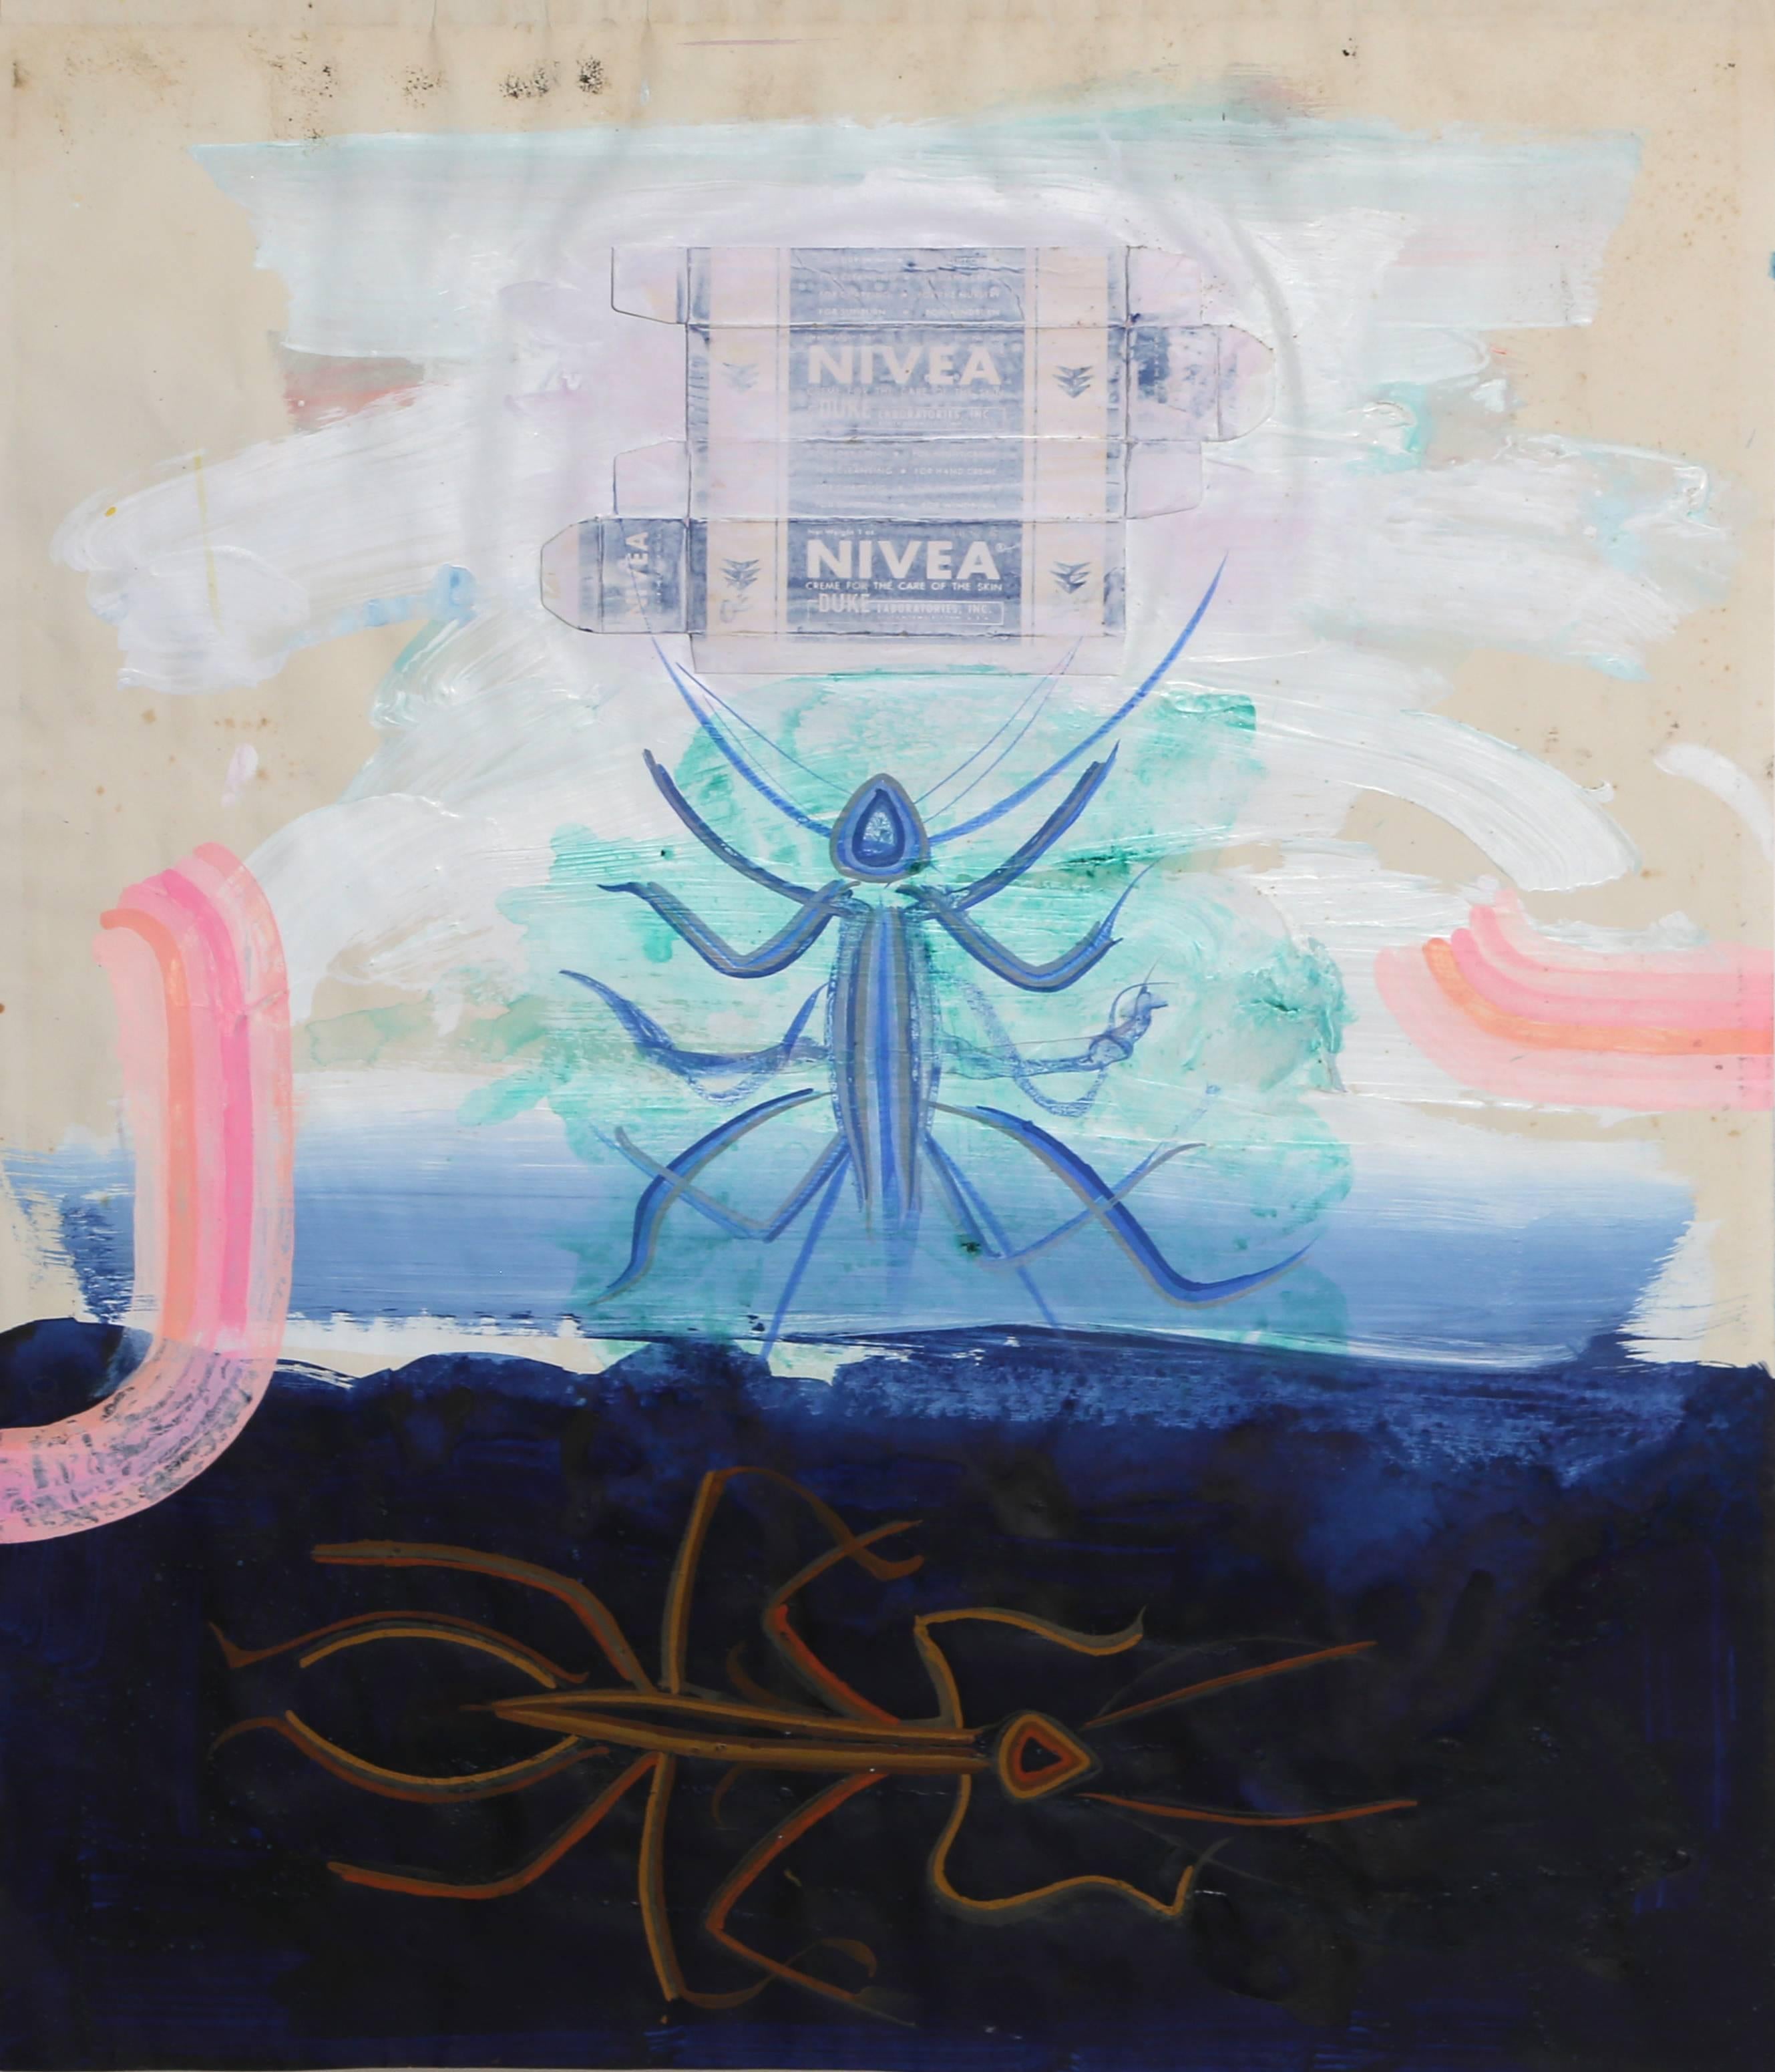 Nivea and Insects, 1966, Mixed Media Collage by Josep Grau Garriga - Mixed Media Art by Josep Grau-Garriga